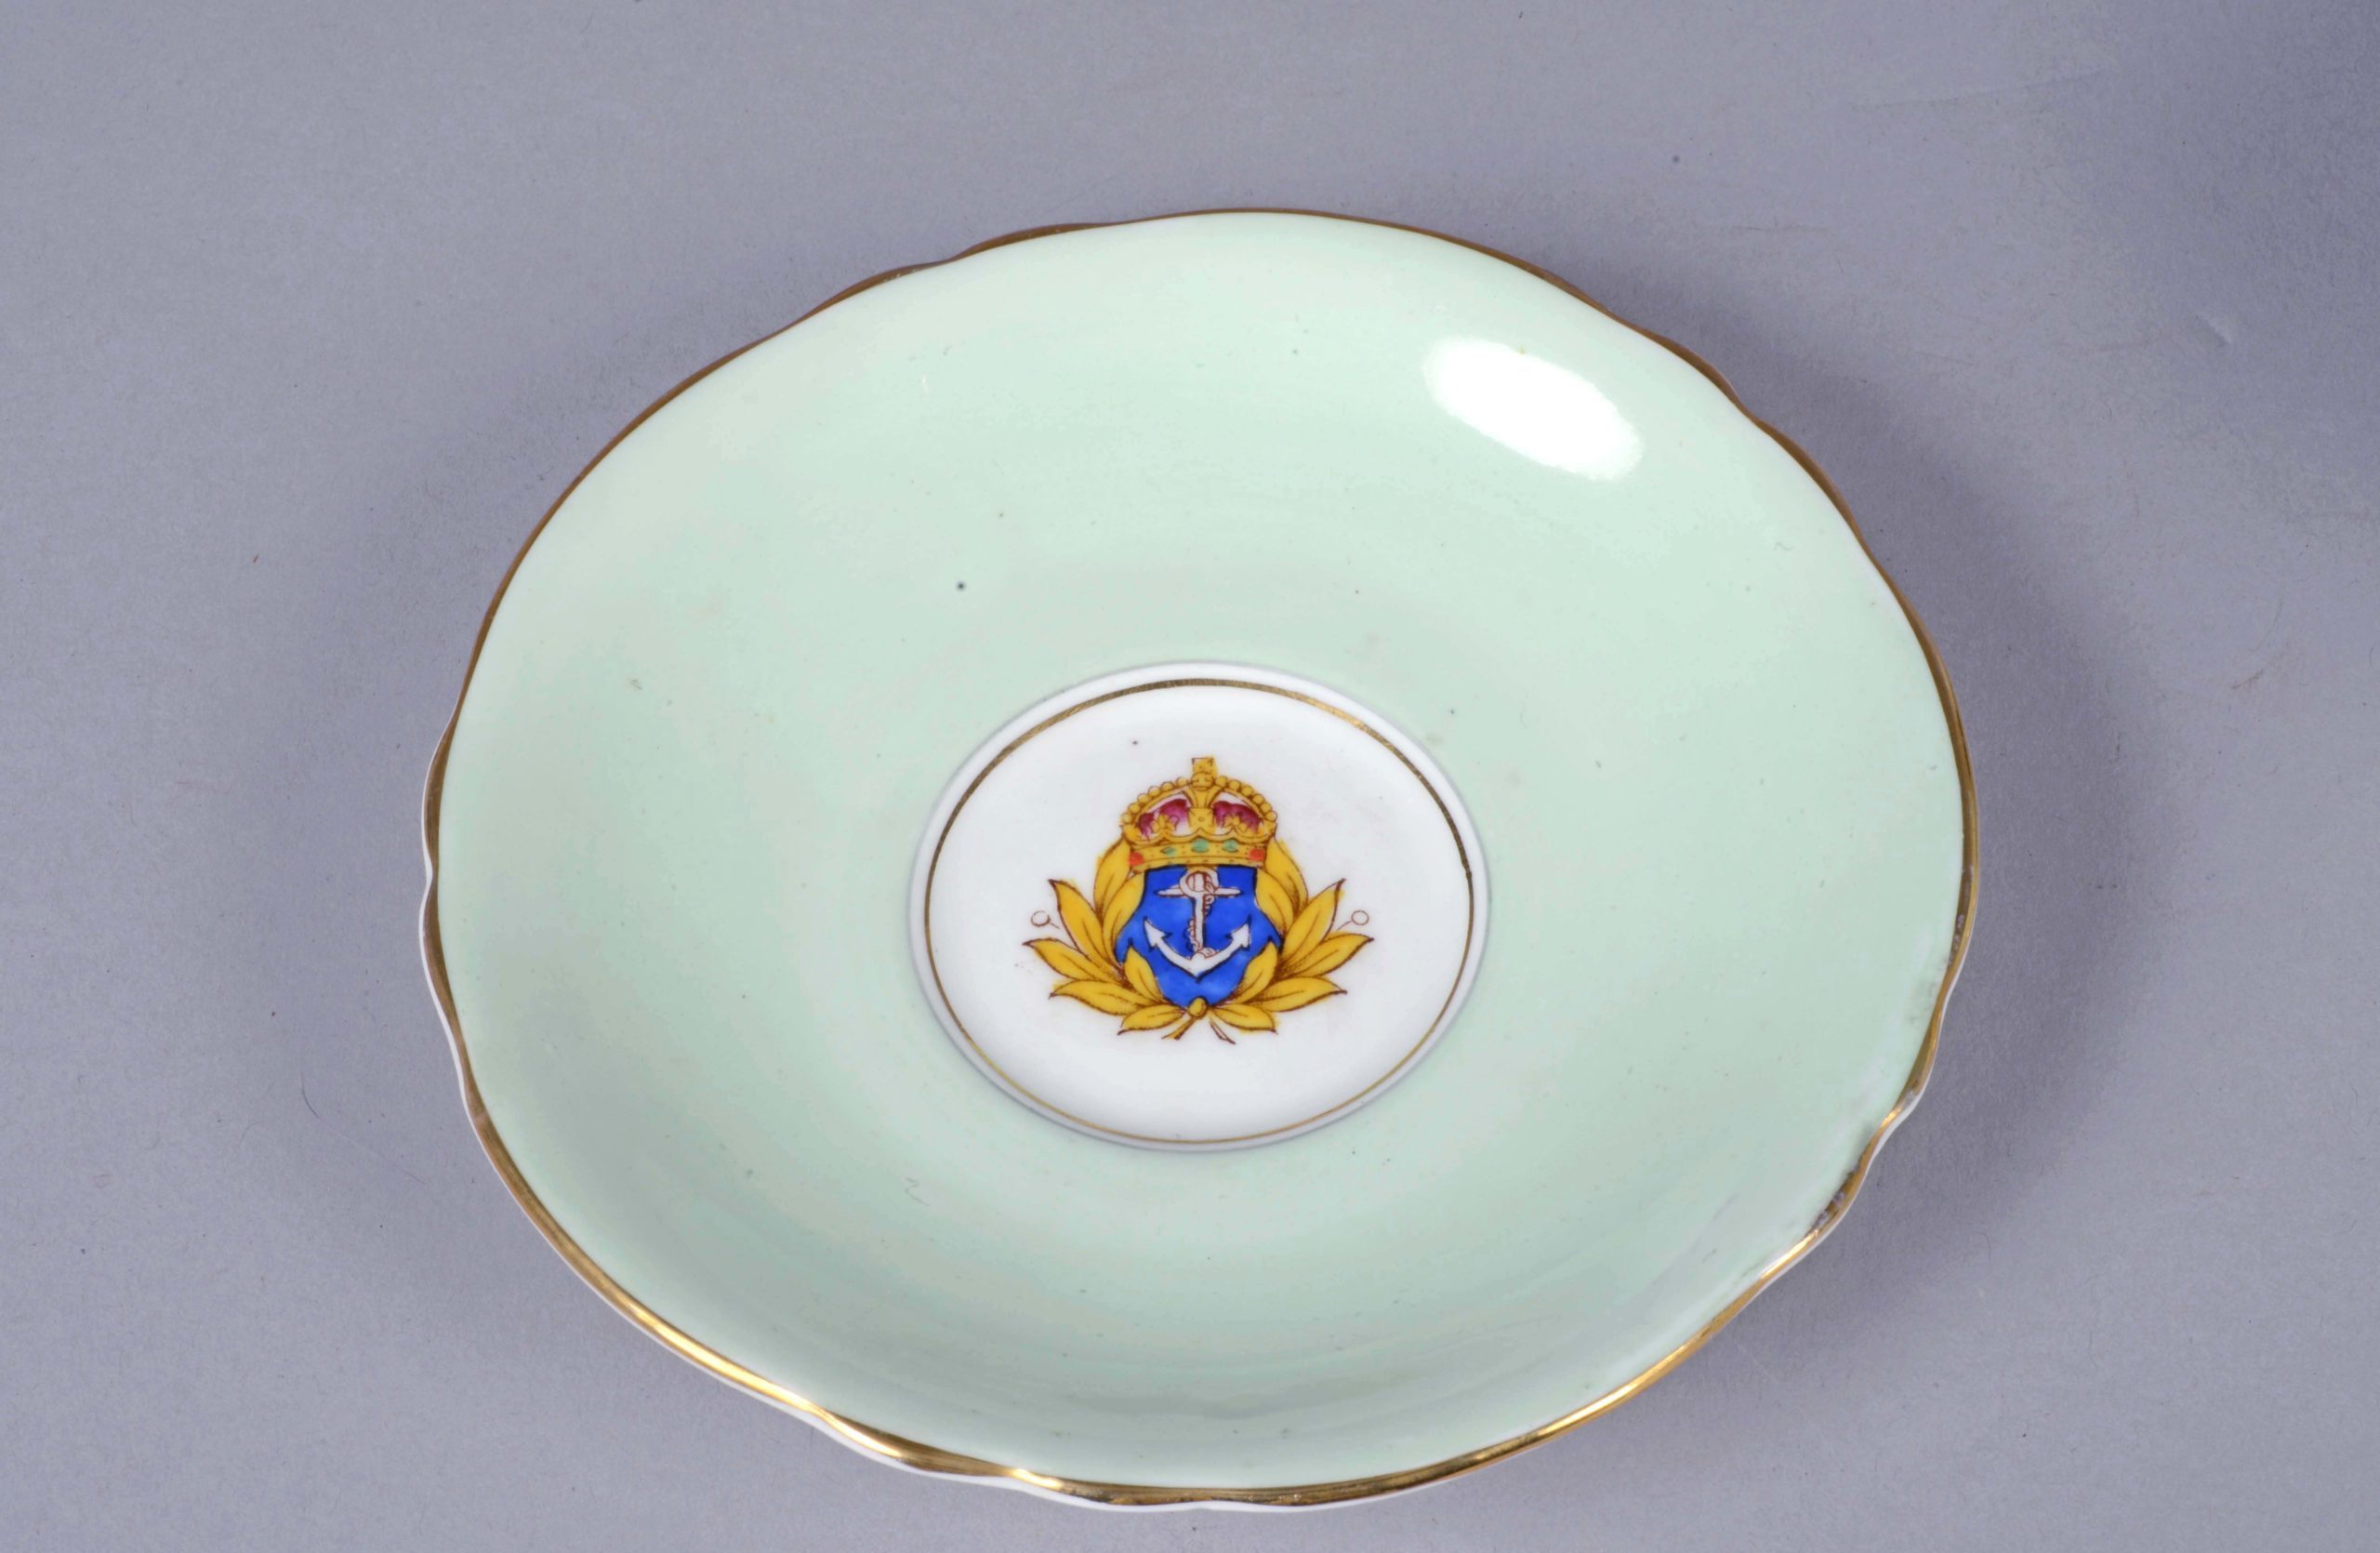 Saucer with Navy Crest from WW2